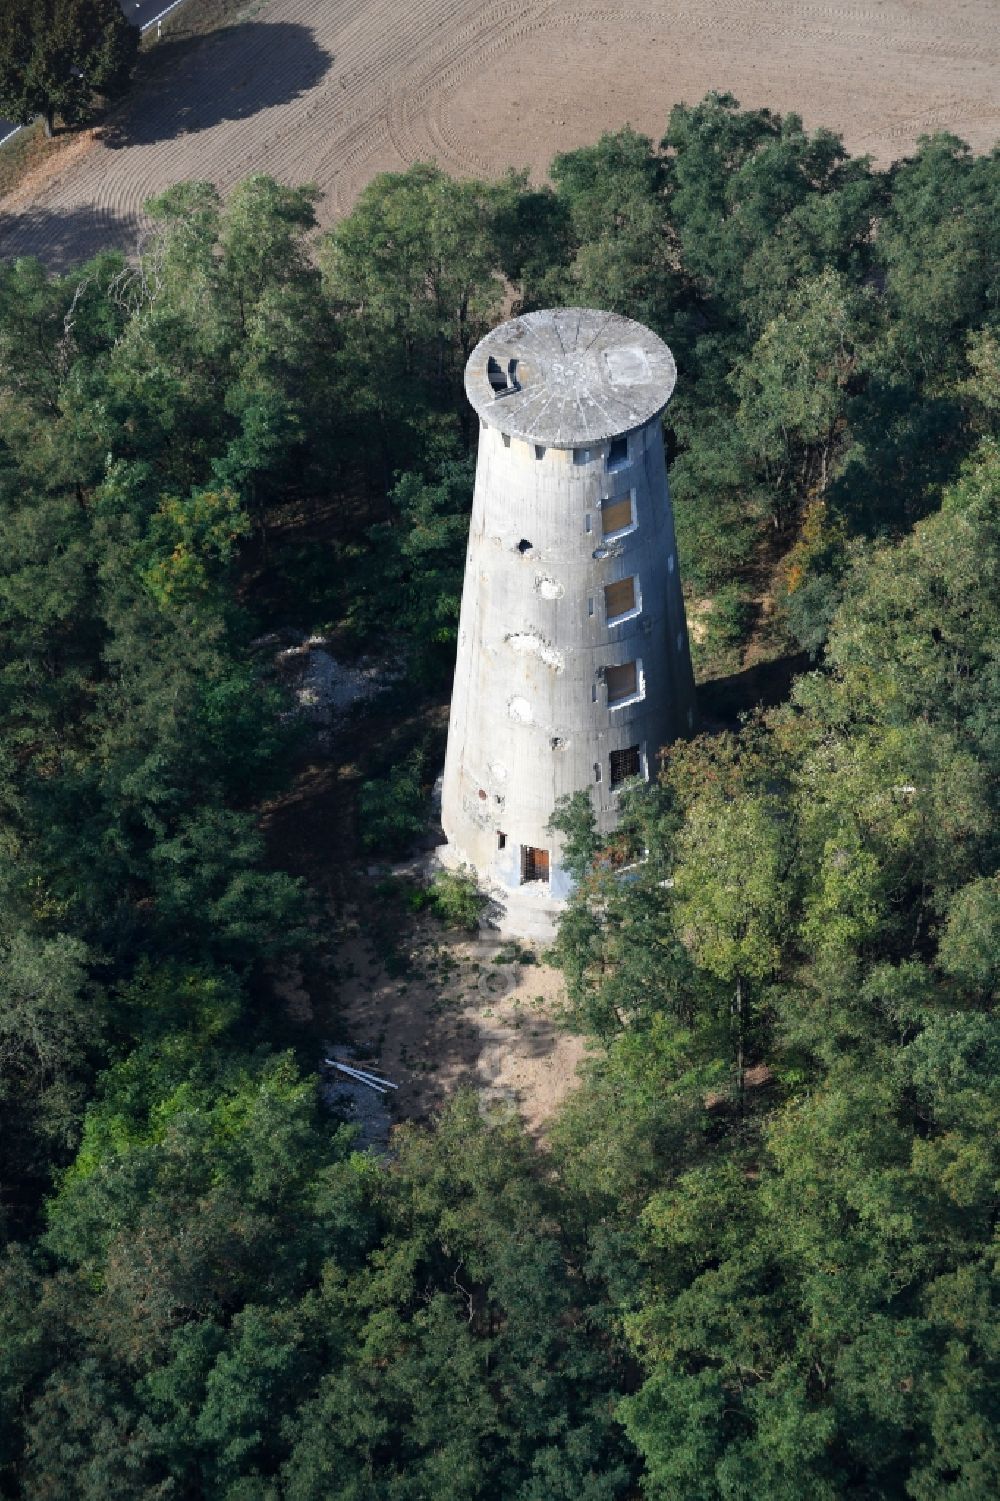 Aerial photograph Weesow - Reconstruction of the concrete tower of the formally militarily used property Radarturm Weesow in Weesow in the state of Brandenburg, Germany